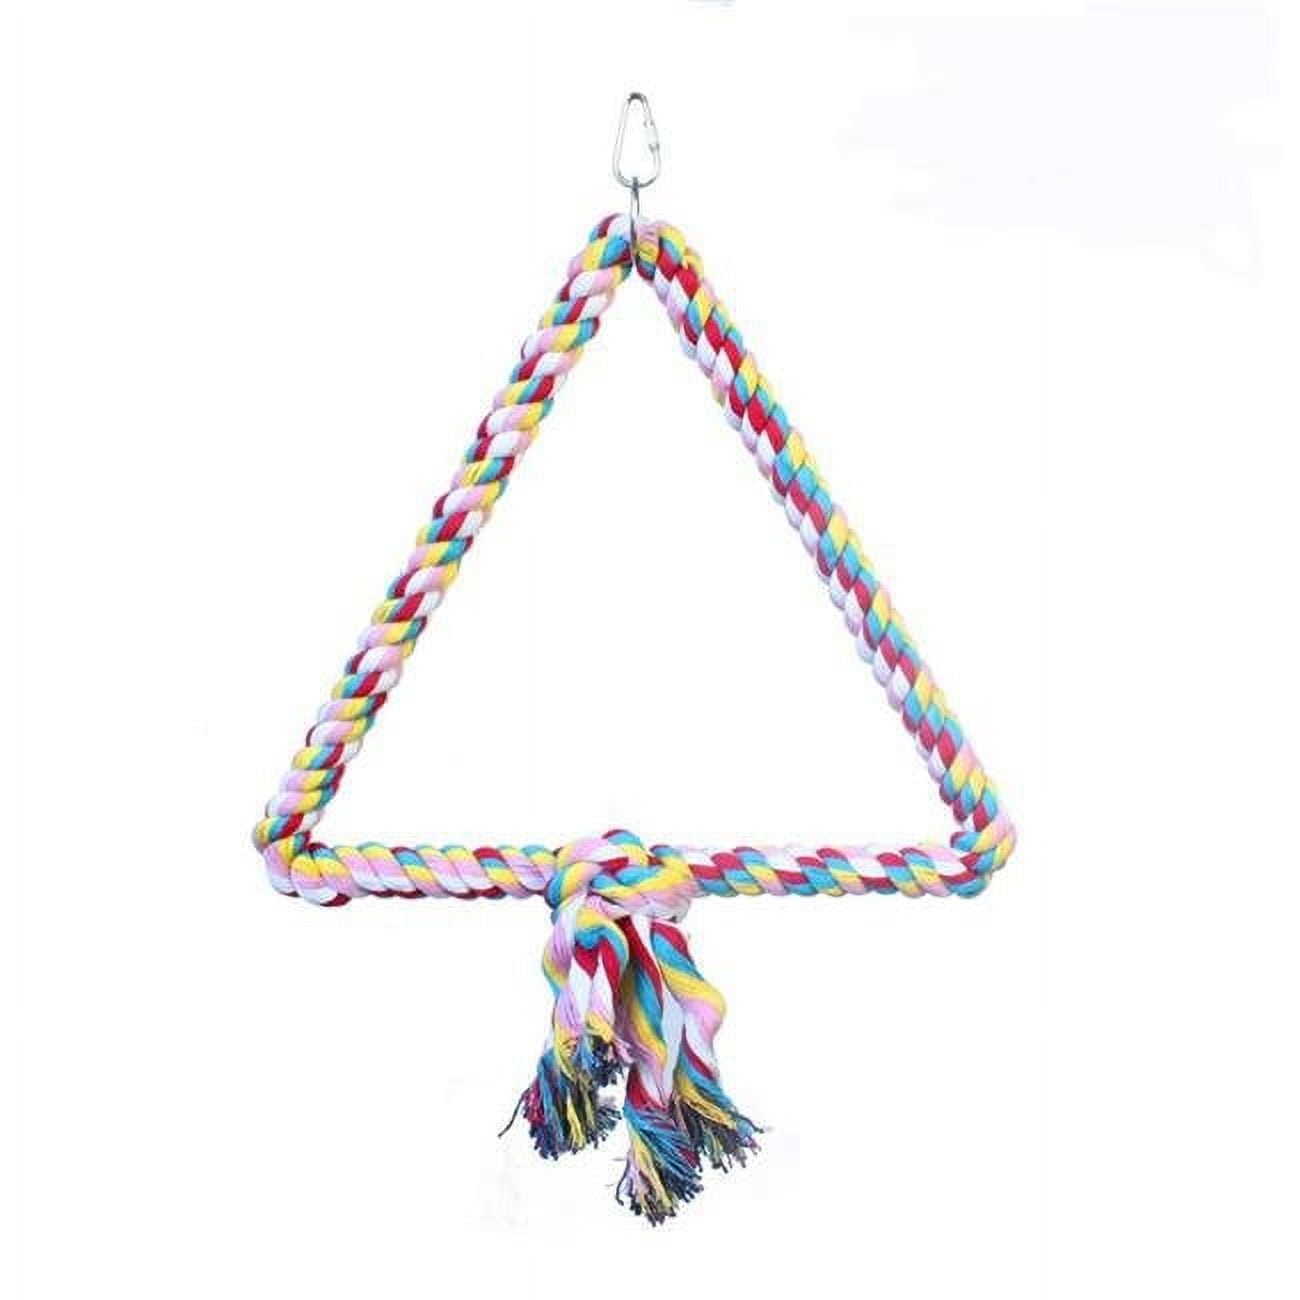 Hb01269 Triangle Cotton Rope Swing -15.75 X 12.6 X 12.6 In.